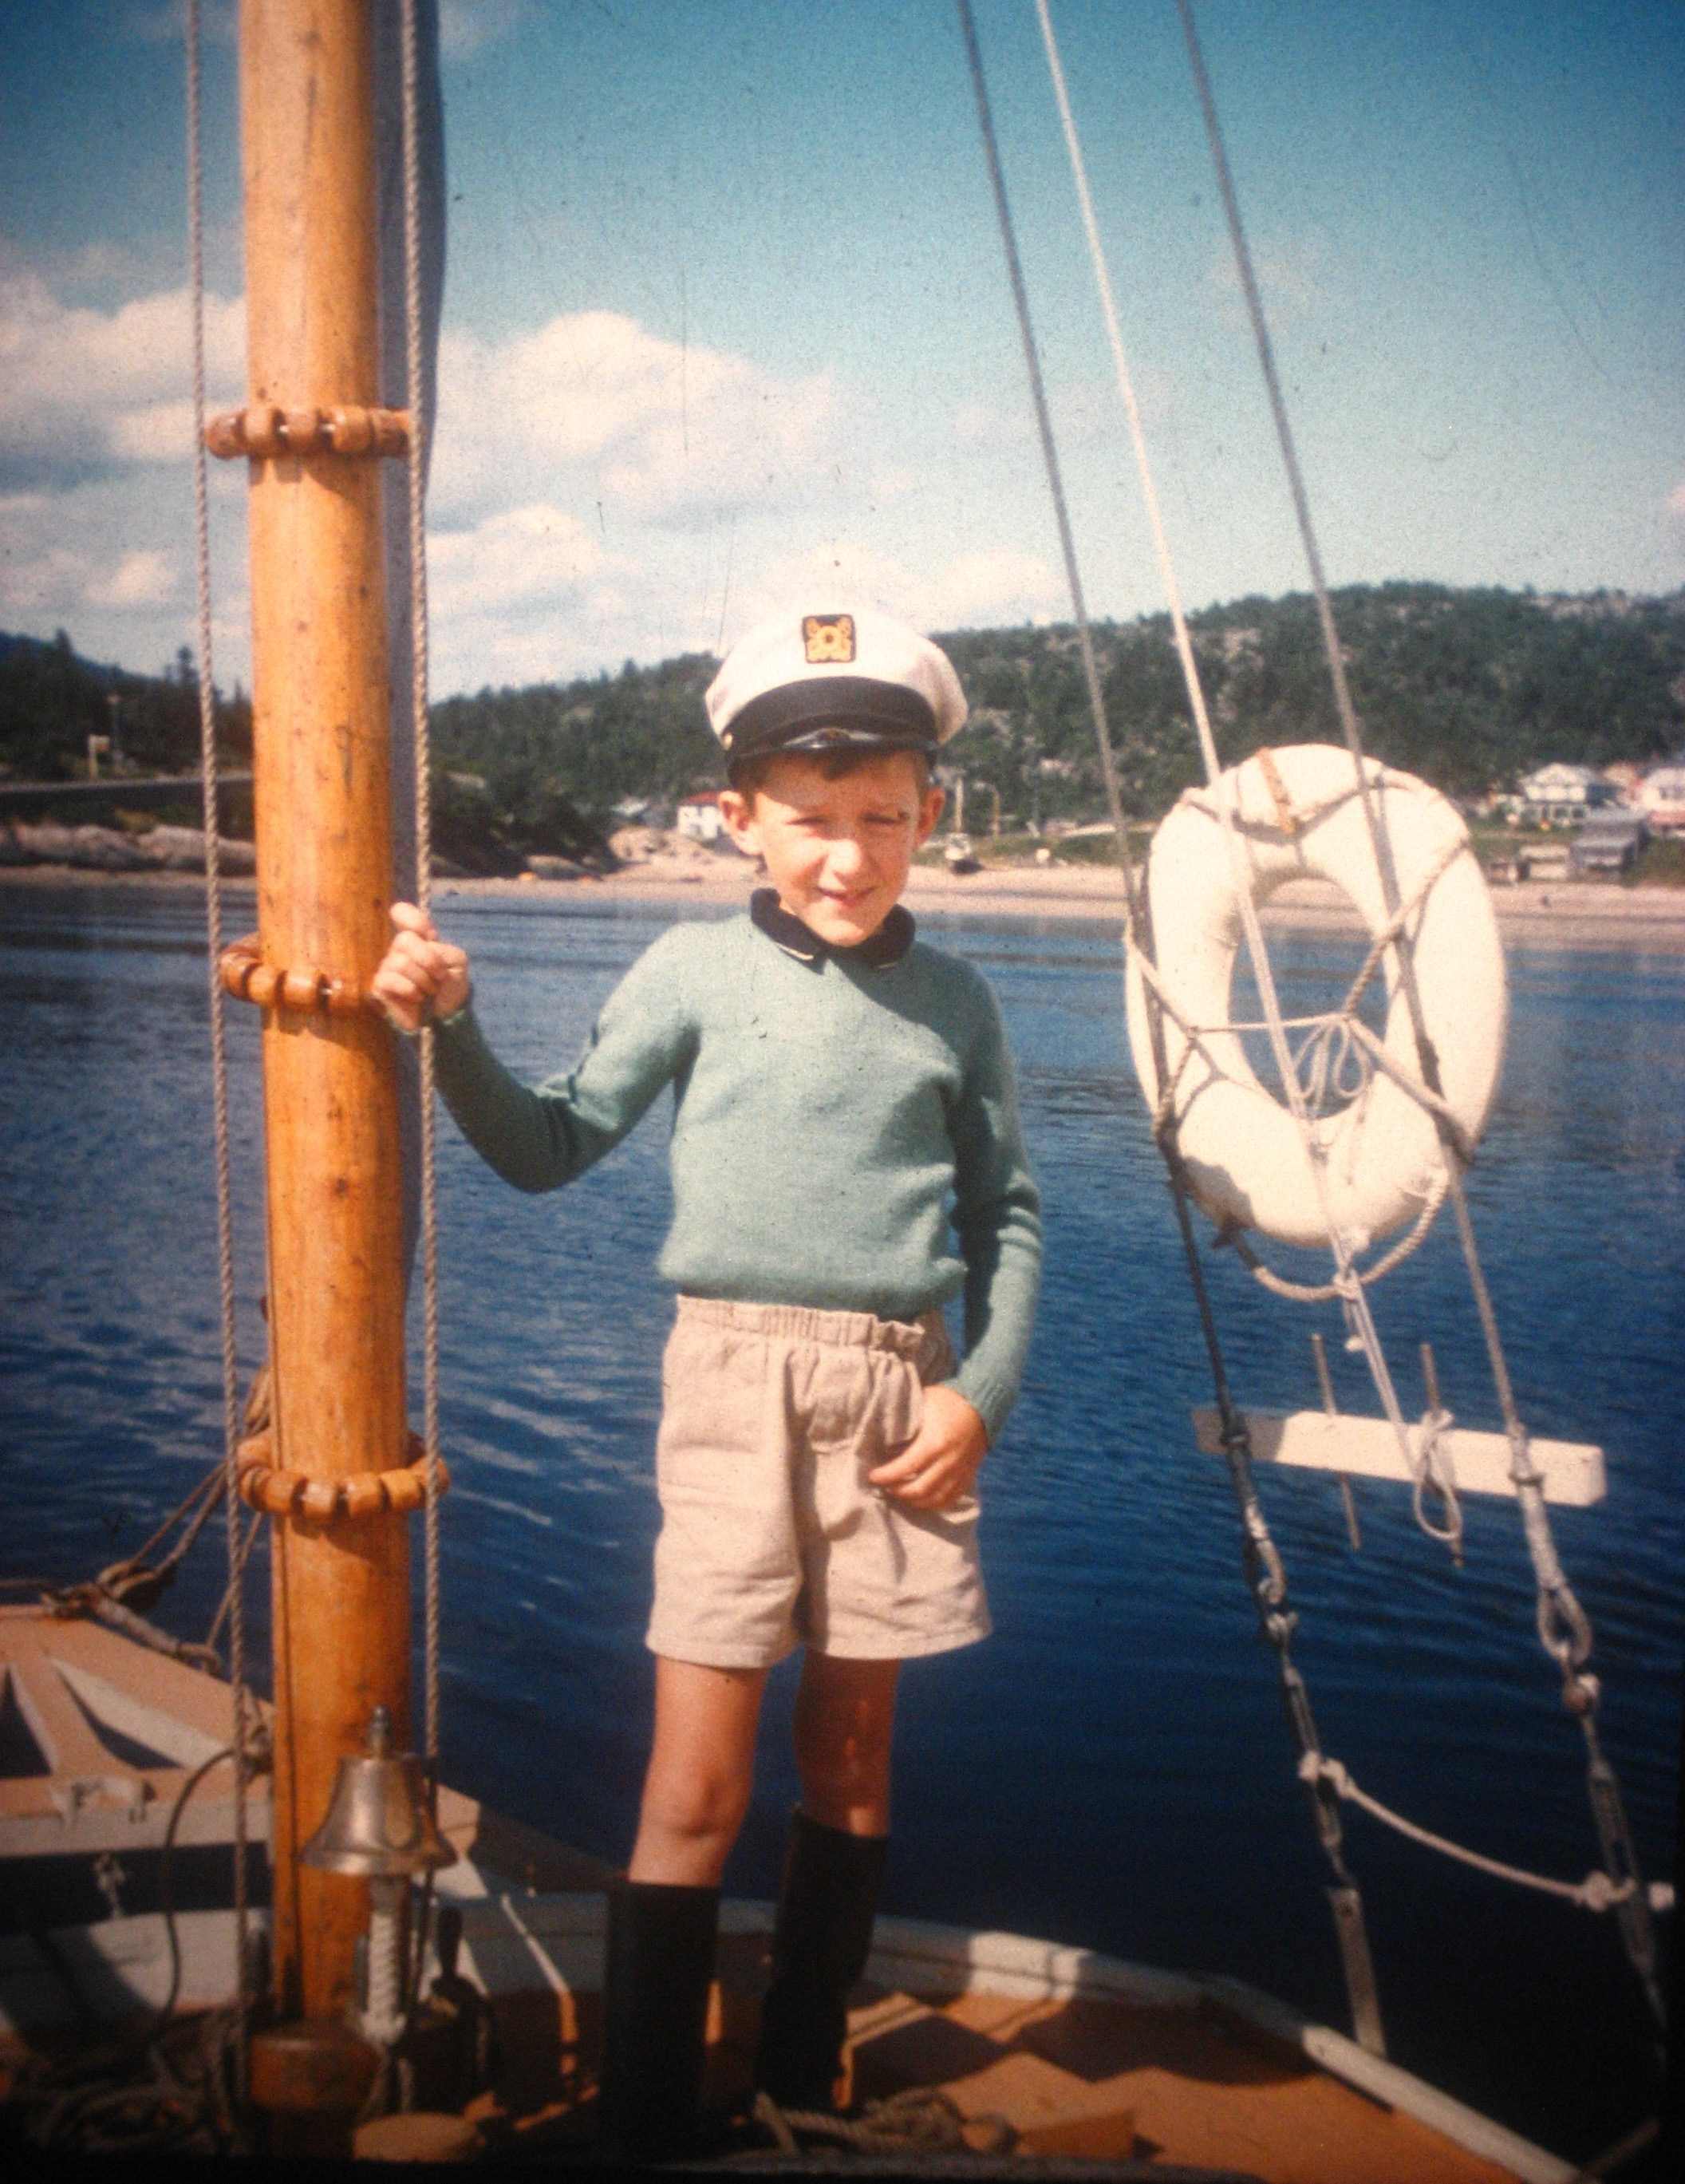 A colour photograph of a boy standing on the deck of a sailboat with the shore in the background.